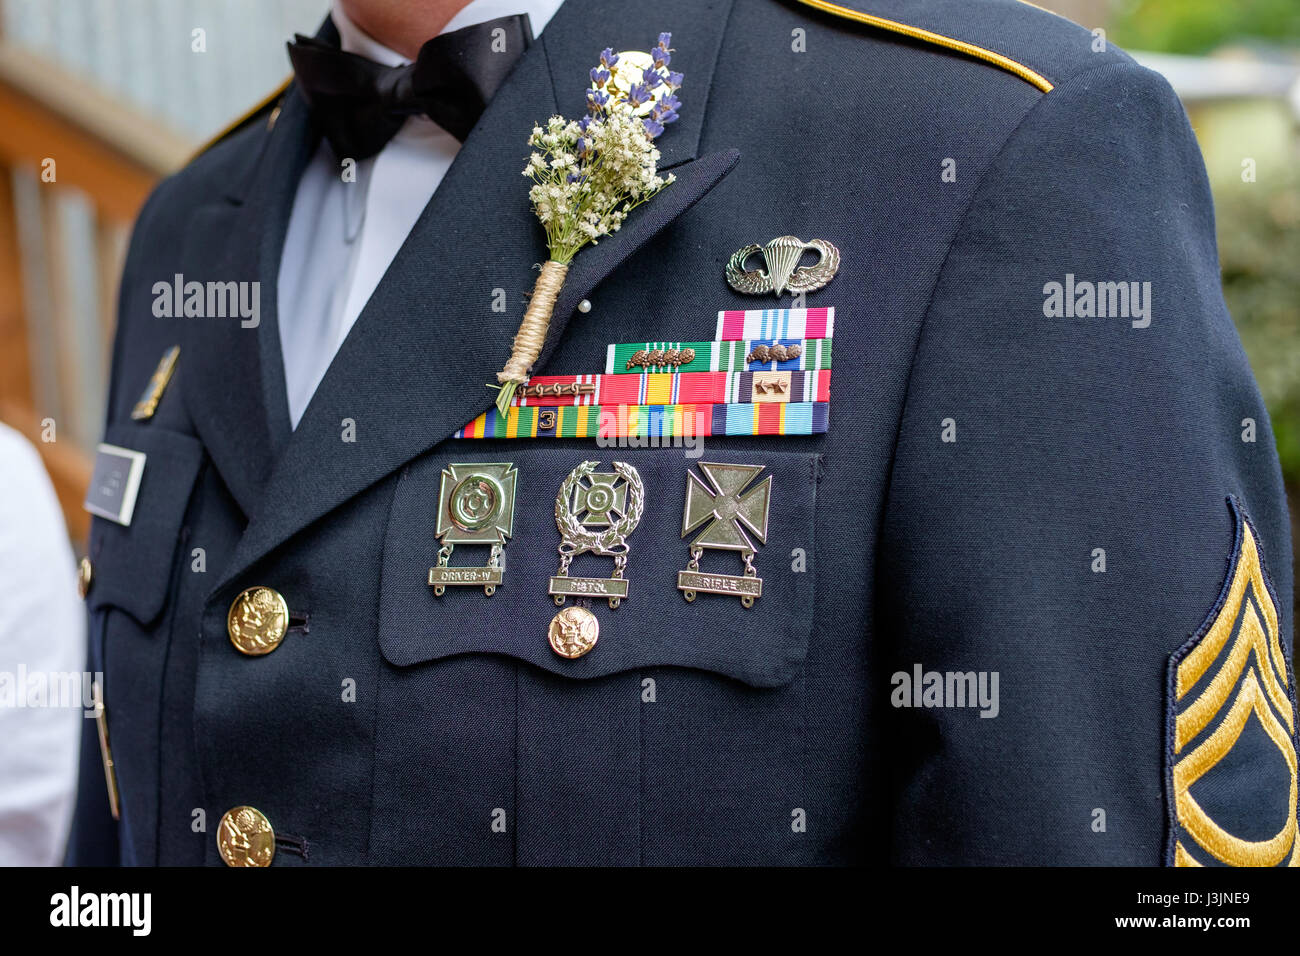 Military Uniform with Medals Stock Photo